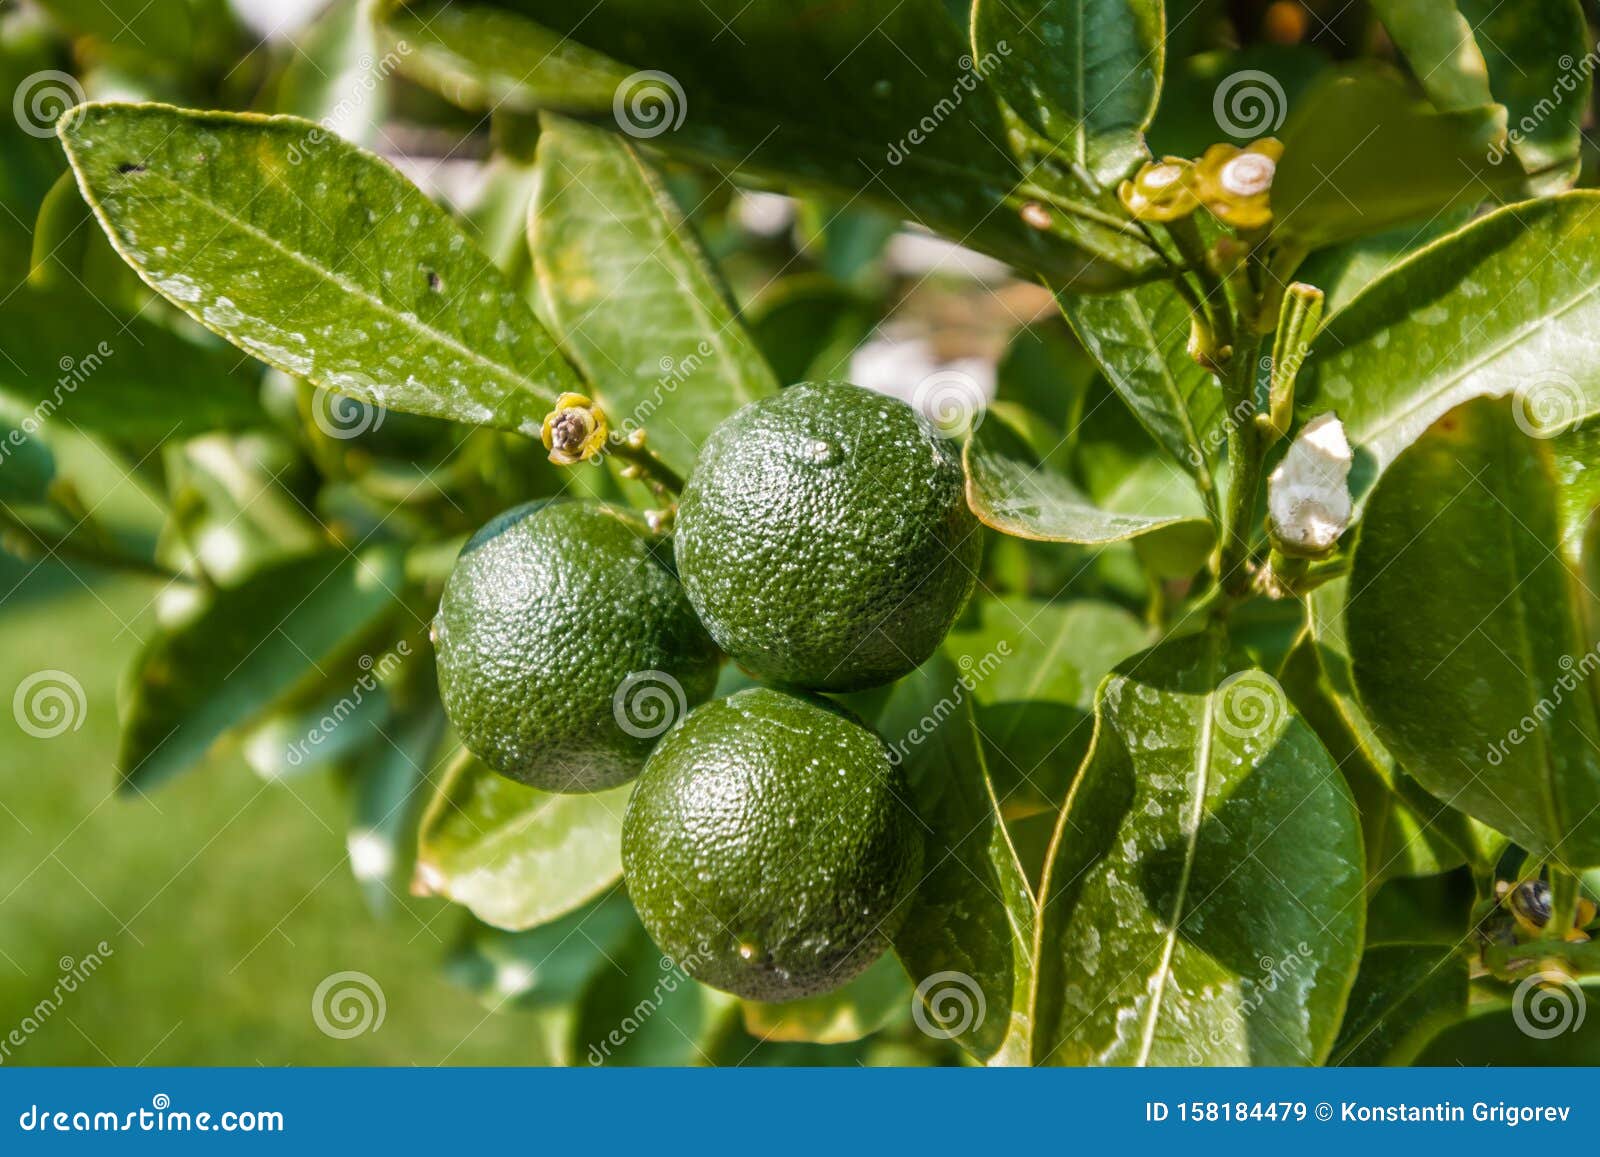 A branch with round oranges with green peel. Green fresh lime on tree in garden. vitamin C. Lime fruits on a branch with green leaves. juicy citrus close-up. Green lemons are coming out